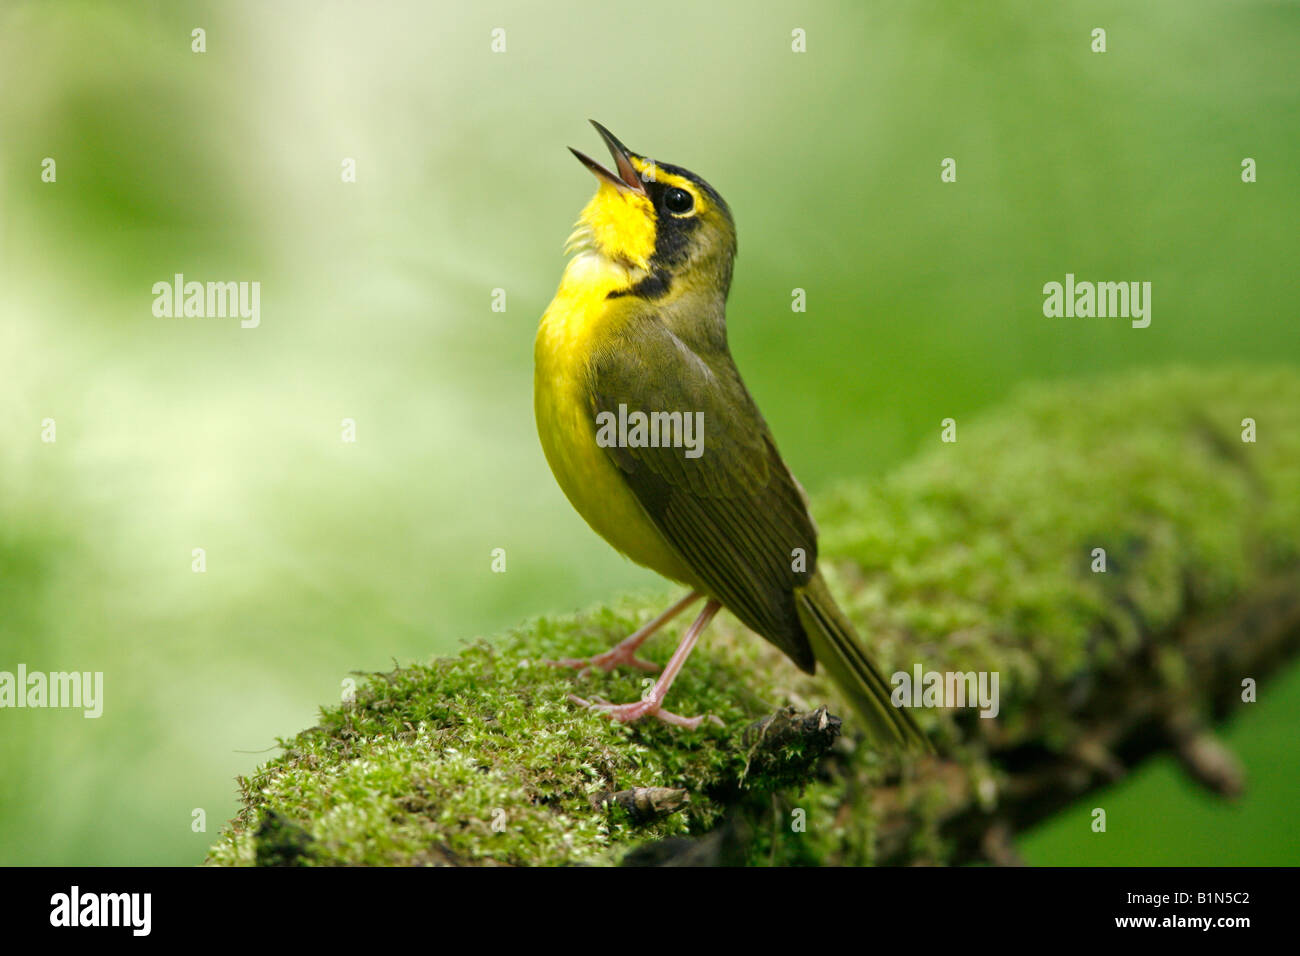 Singing Kentucky Warbler perched on moss covered branch Stock Photo